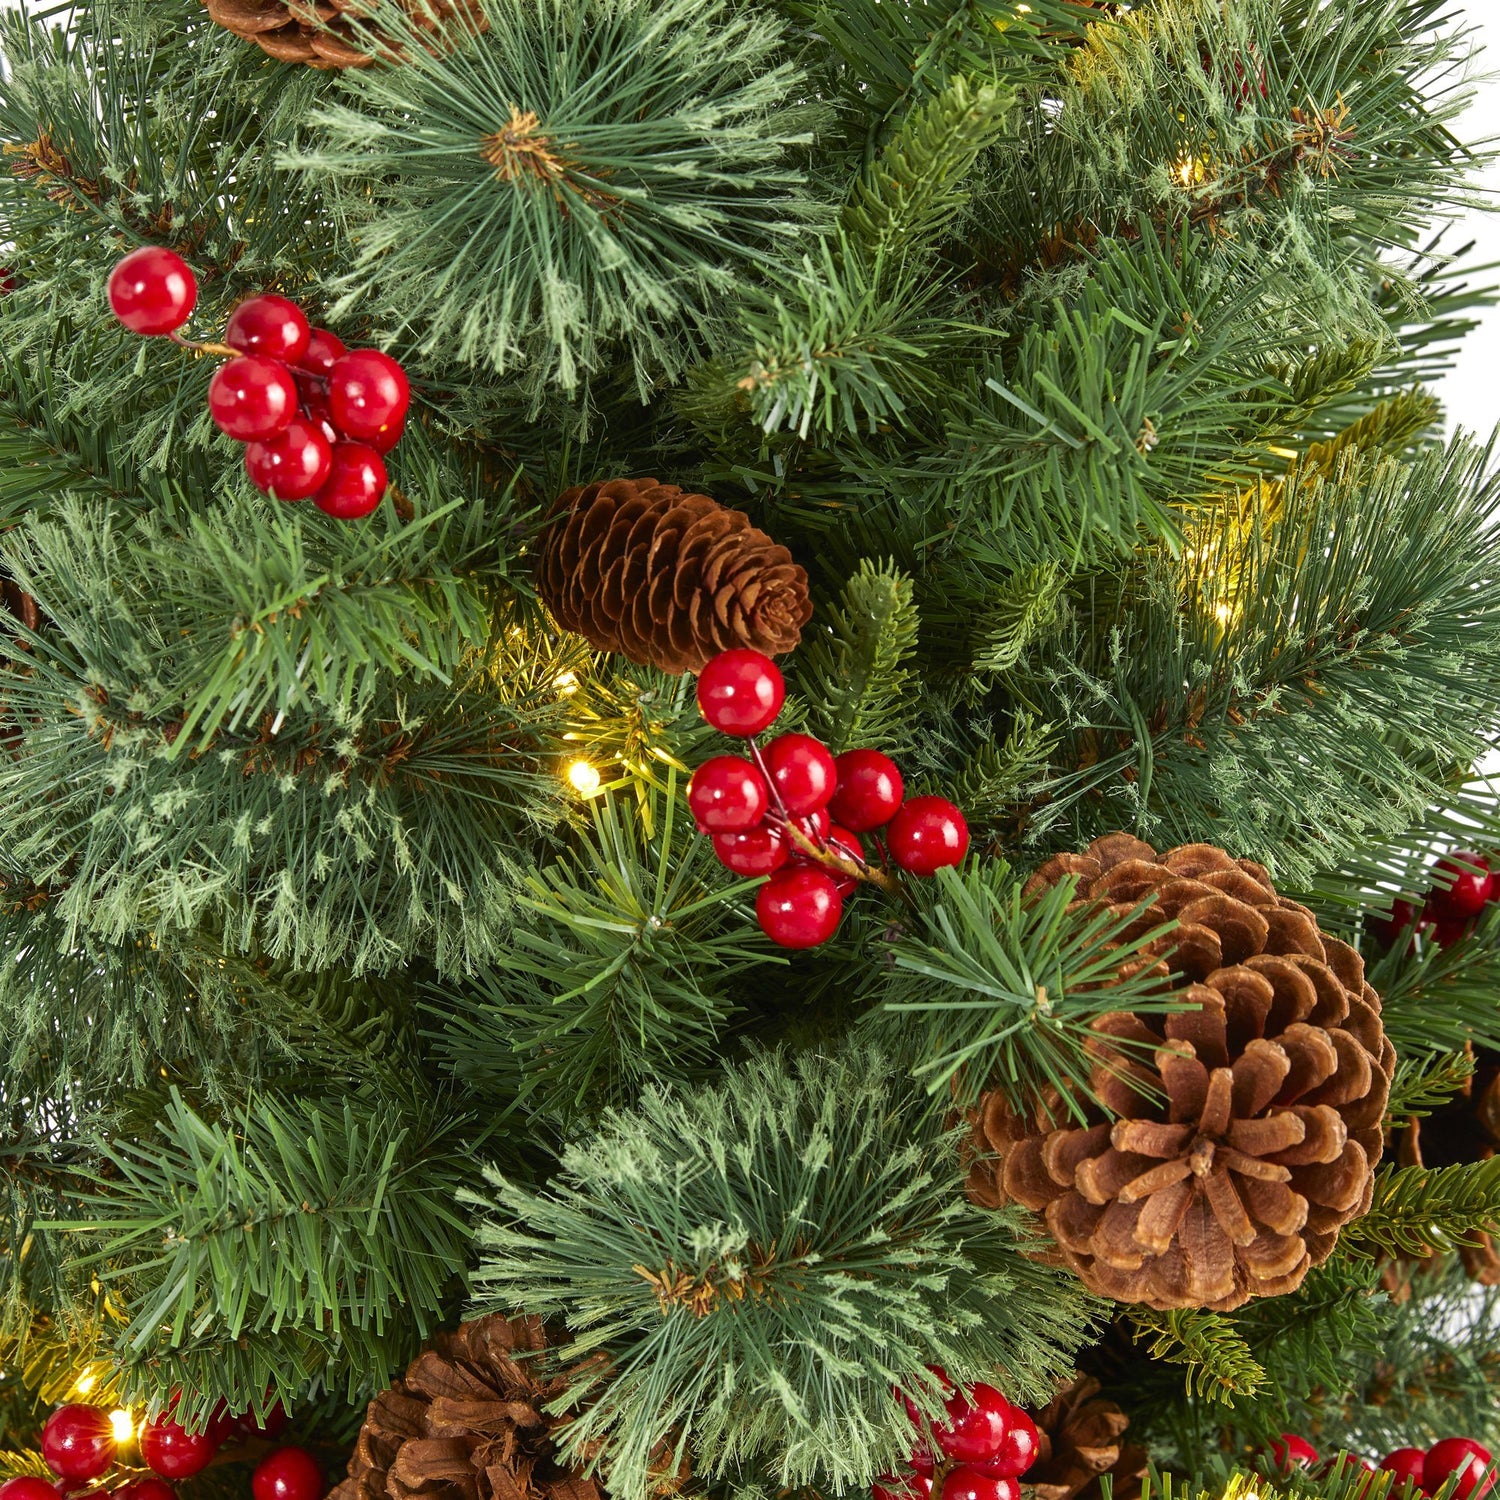 3’ Norway Mixed Pine Artificial Christmas Tree with 50 Clear LED Lights, Pine Cones and Berries